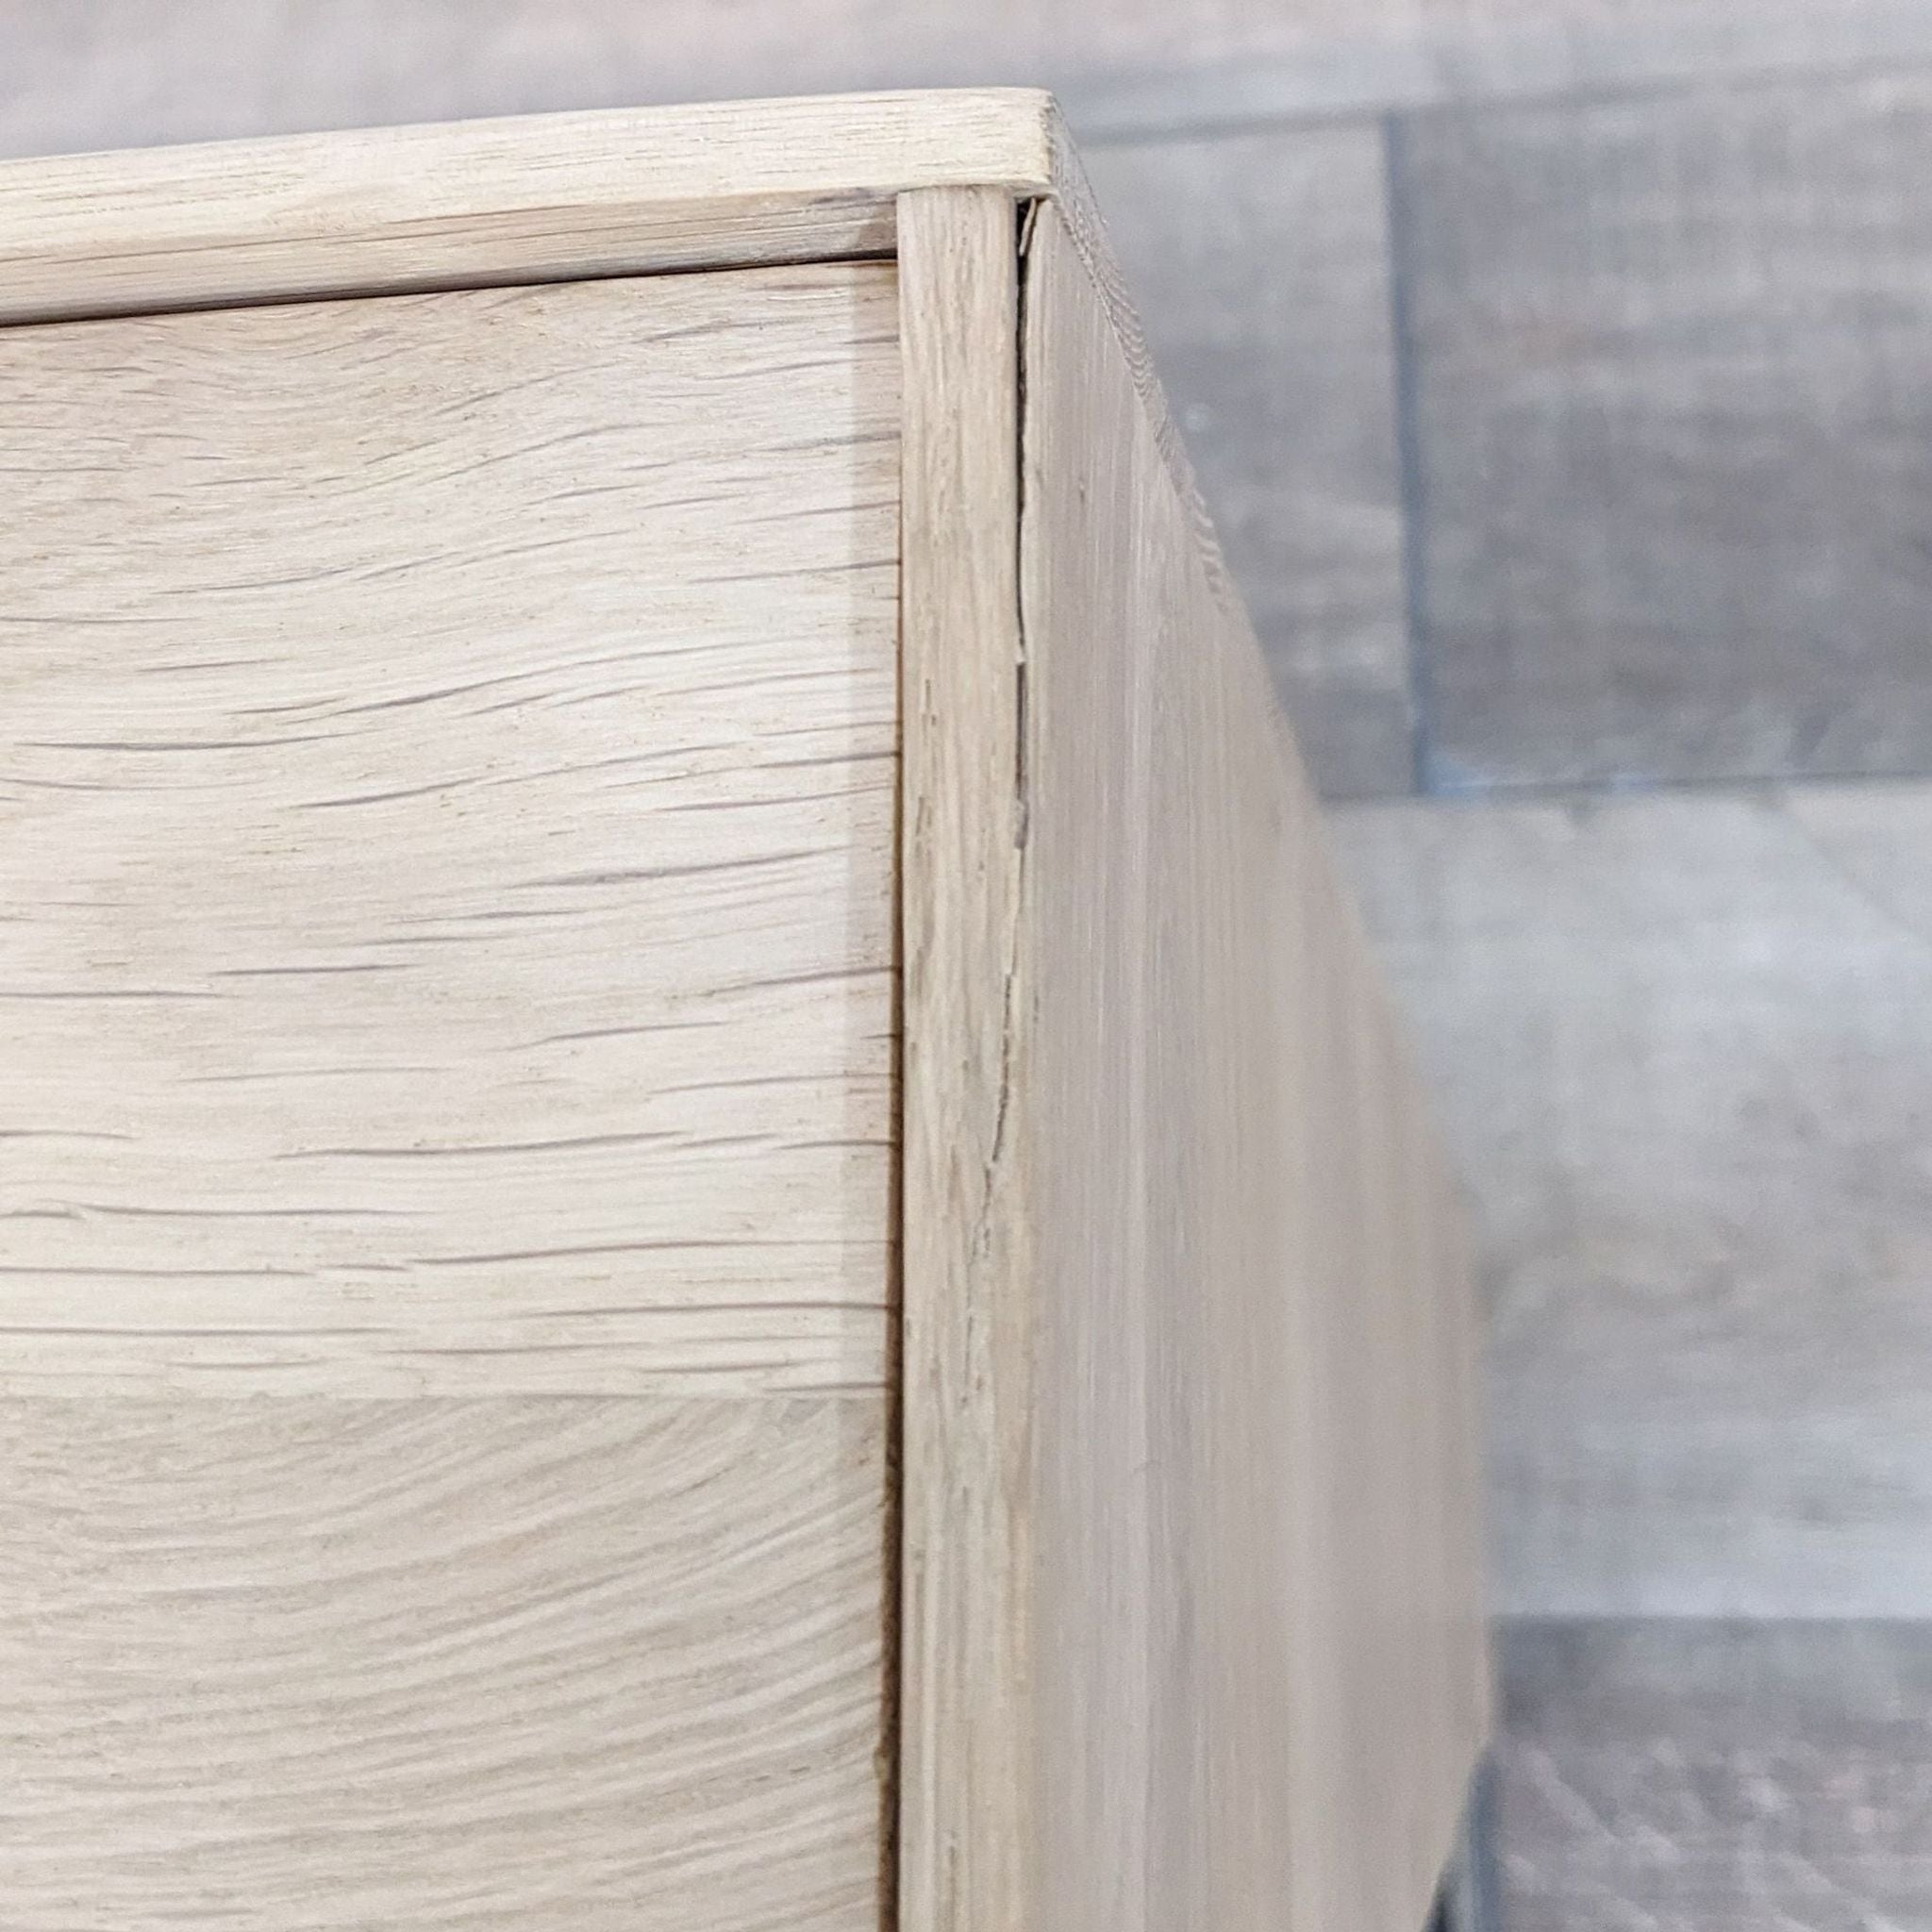 3. Close-up of the corner of an Industry West coffee table, highlighting the wood grain and joinery details on a wood-textured floor.